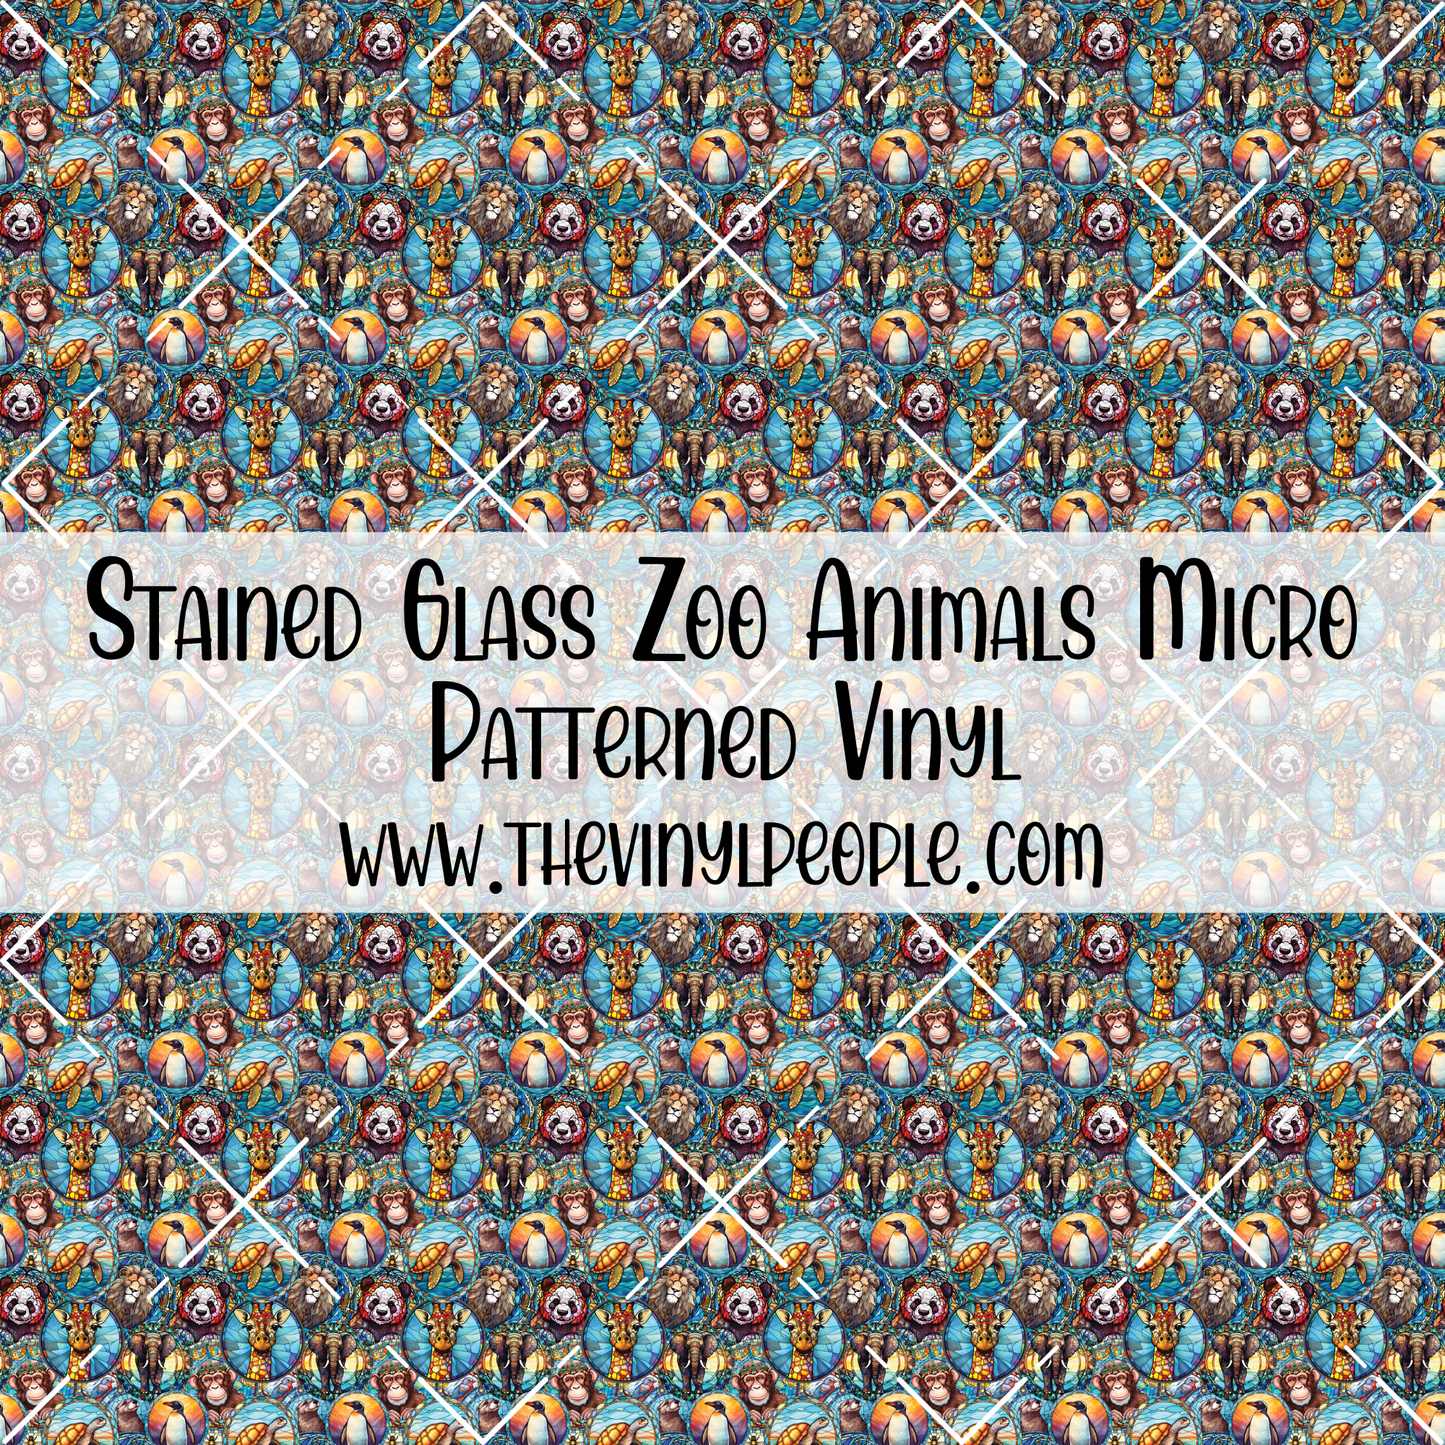 Stained Glass Zoo Animals Patterned Vinyl